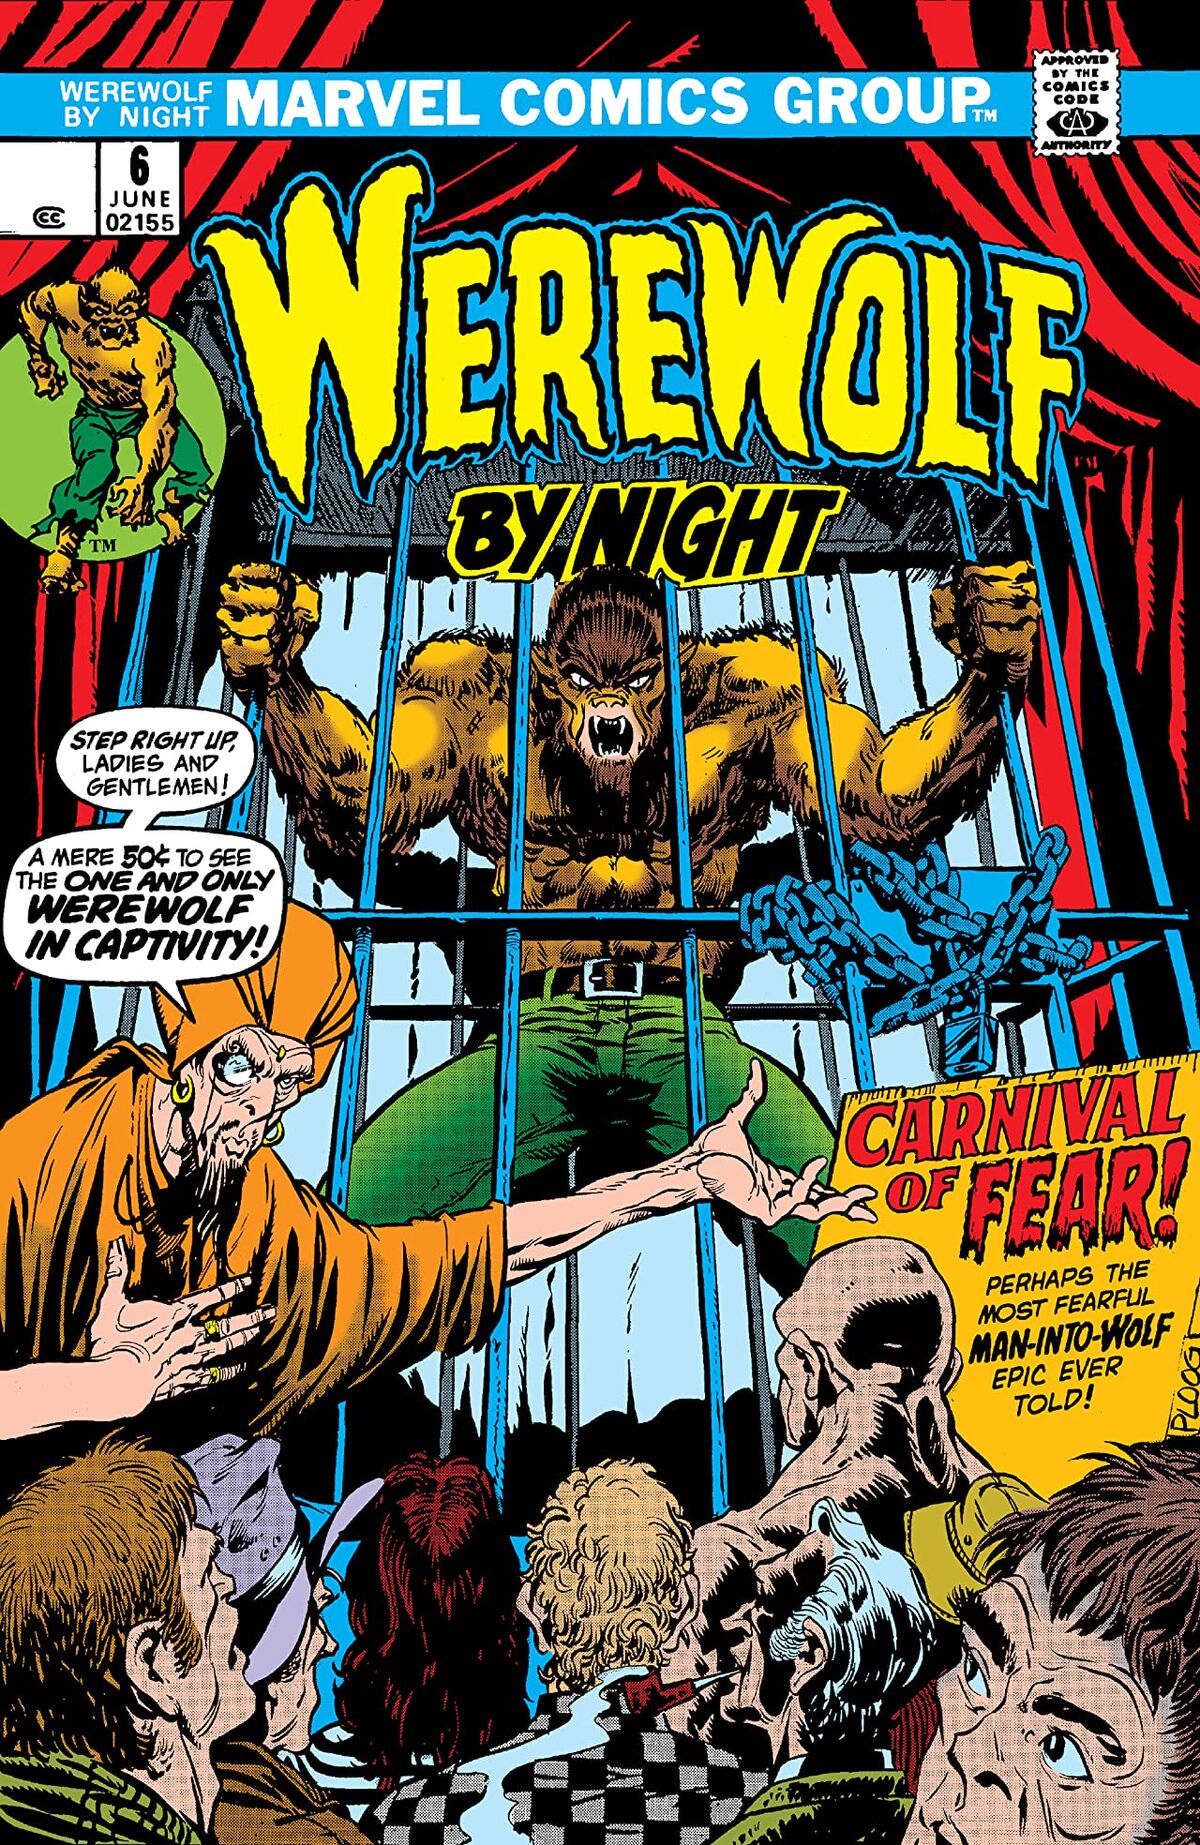 Werewolf by Night Comics Reading Guide